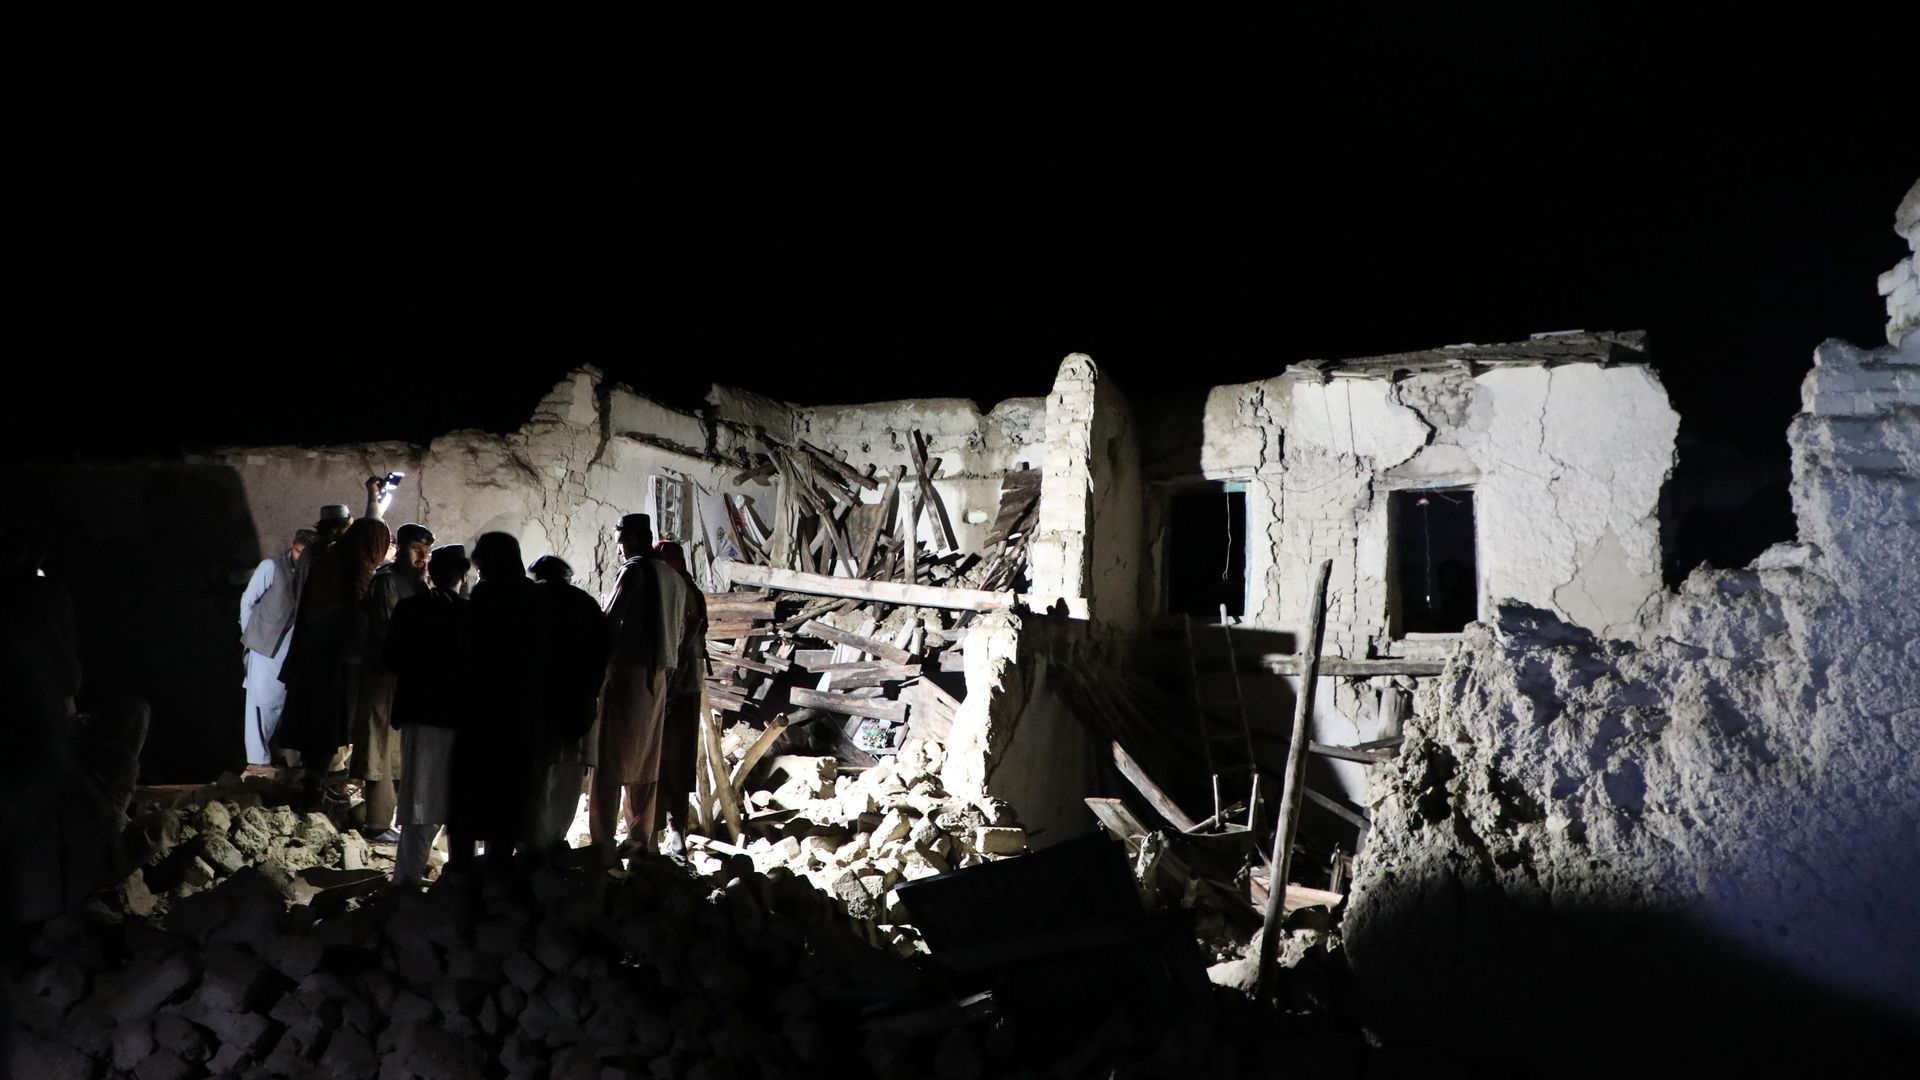 A group of people searching through rubble in the dark. 